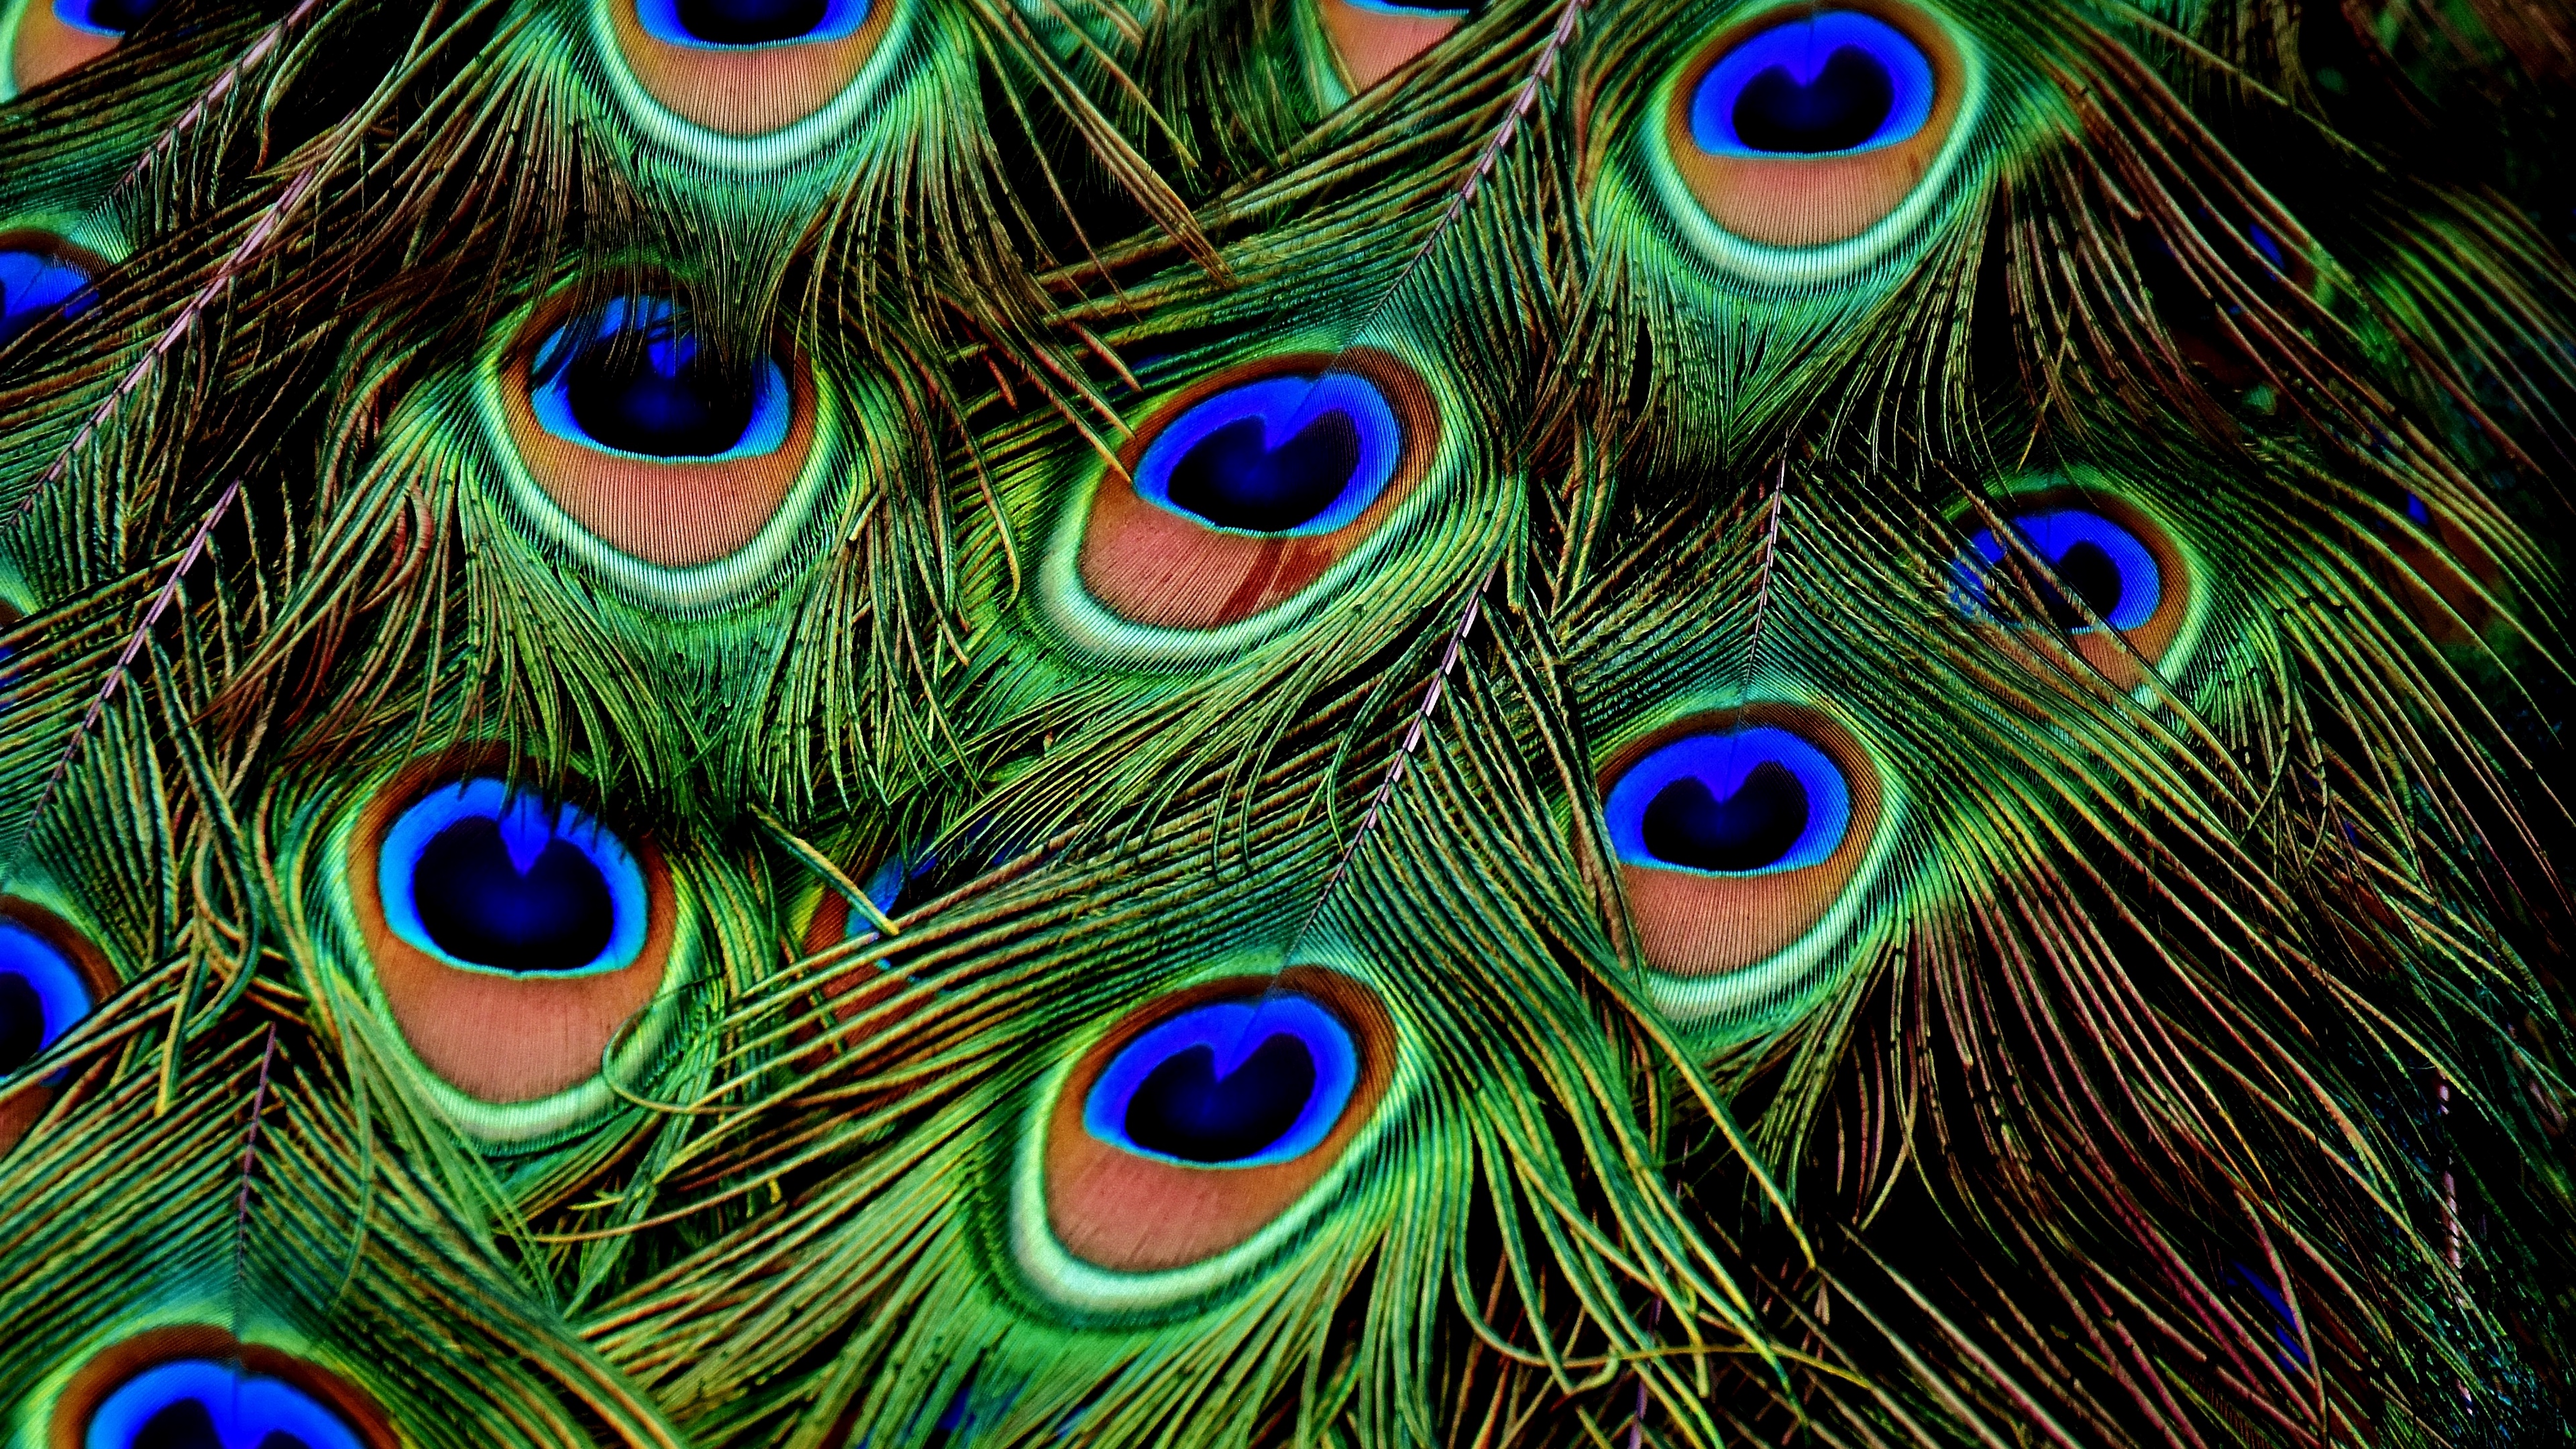 peacocks feathers patterns 4k 1536097898 - peacocks, feathers, patterns 4k - peacocks, patterns, Feathers